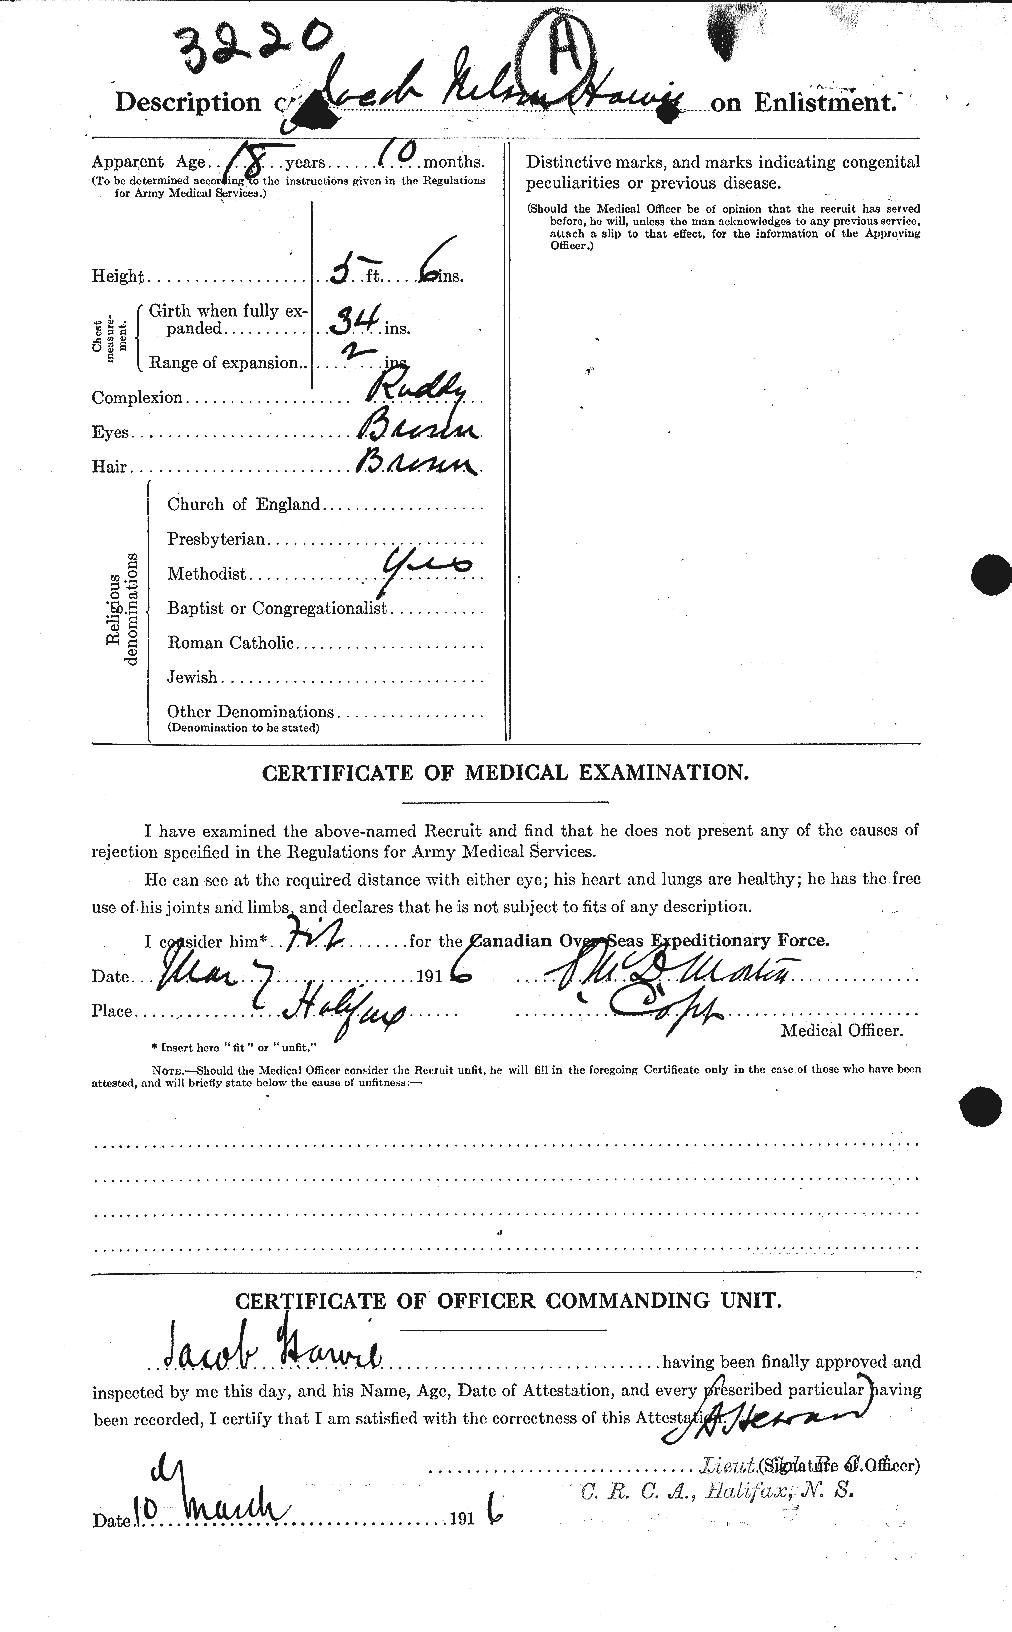 Personnel Records of the First World War - CEF 382278b